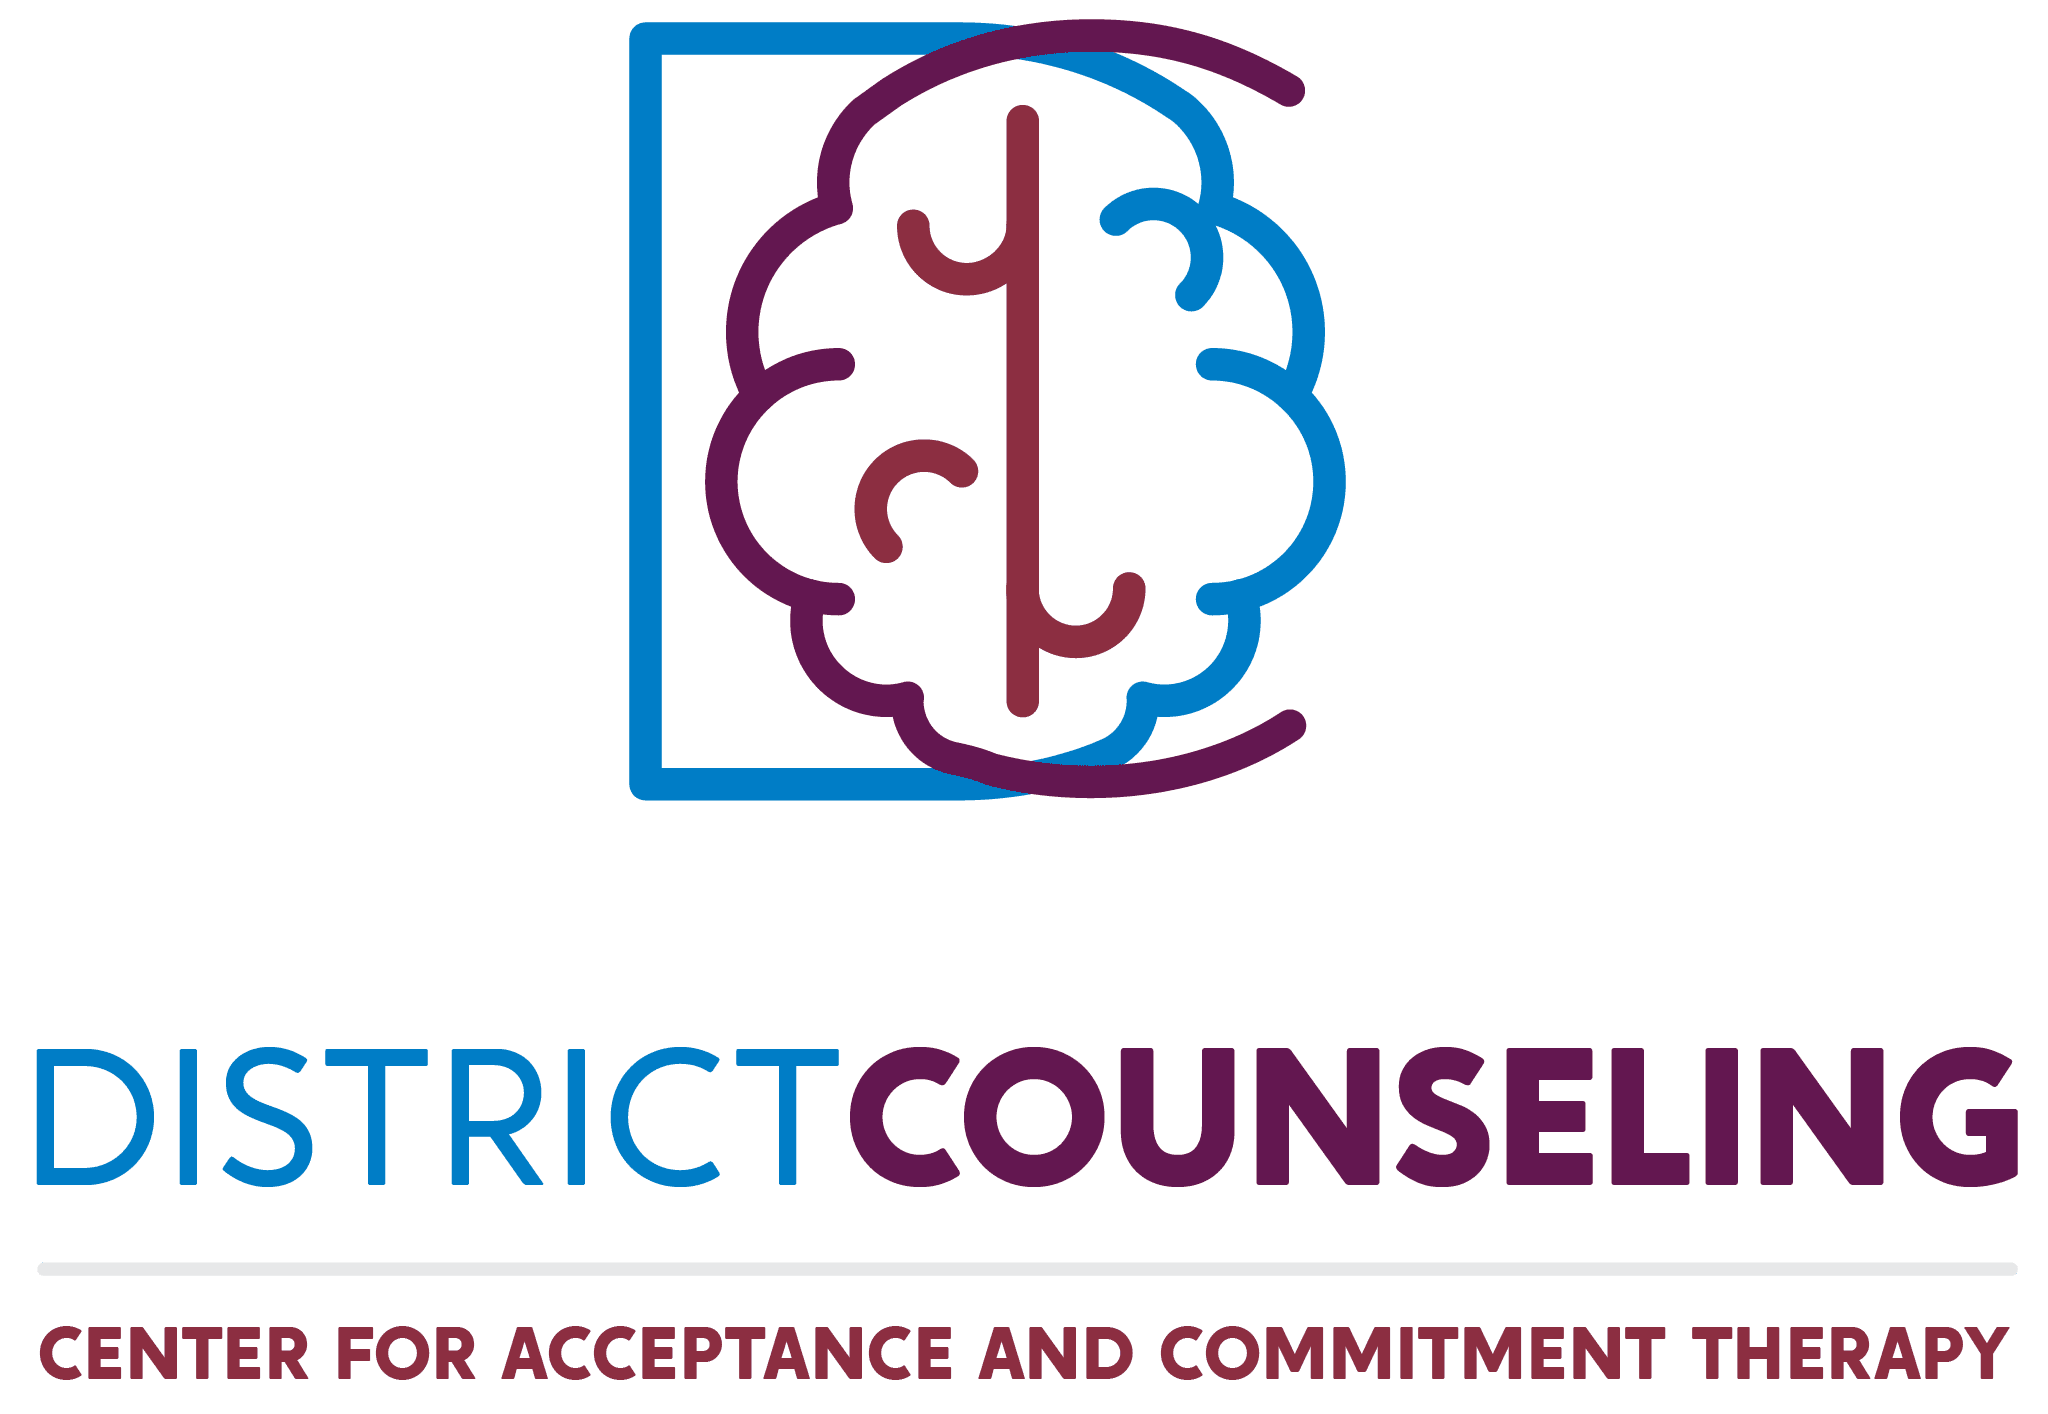 District Counseling Center for Acceptance and Commitment Therapy